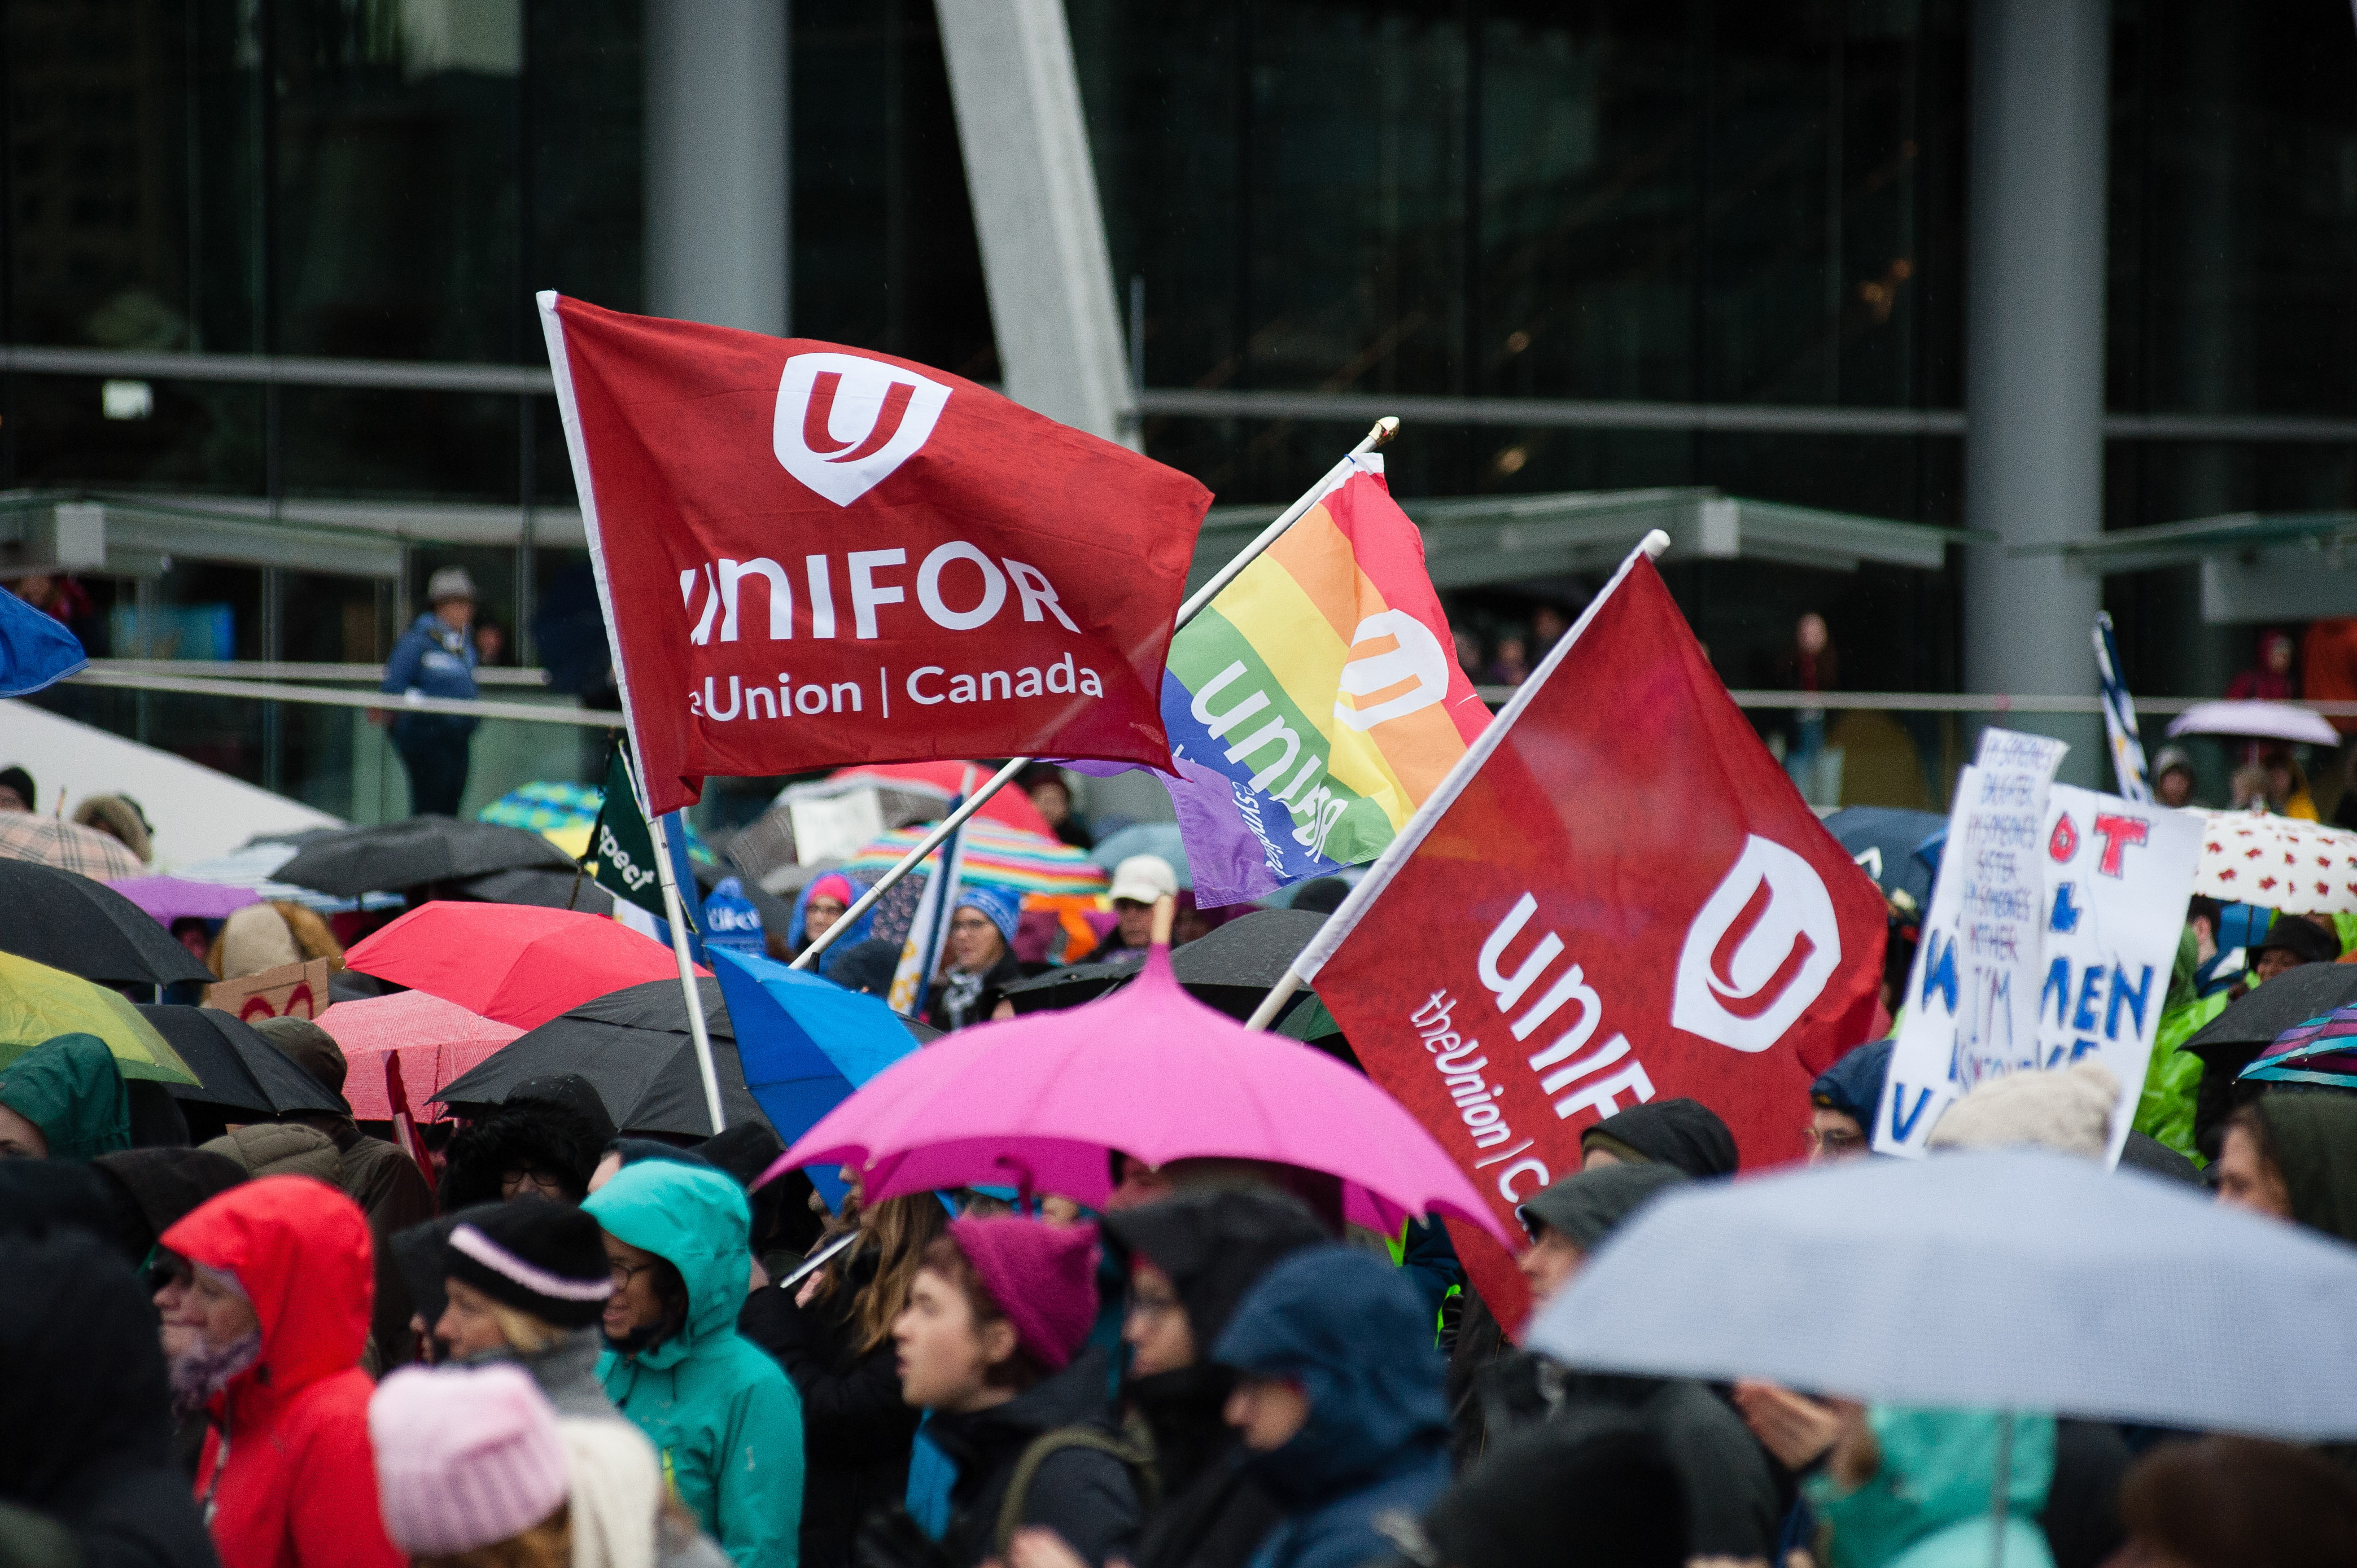 Even with the unfavourable weather conditions, there was a large turnout at this year's Women's March.